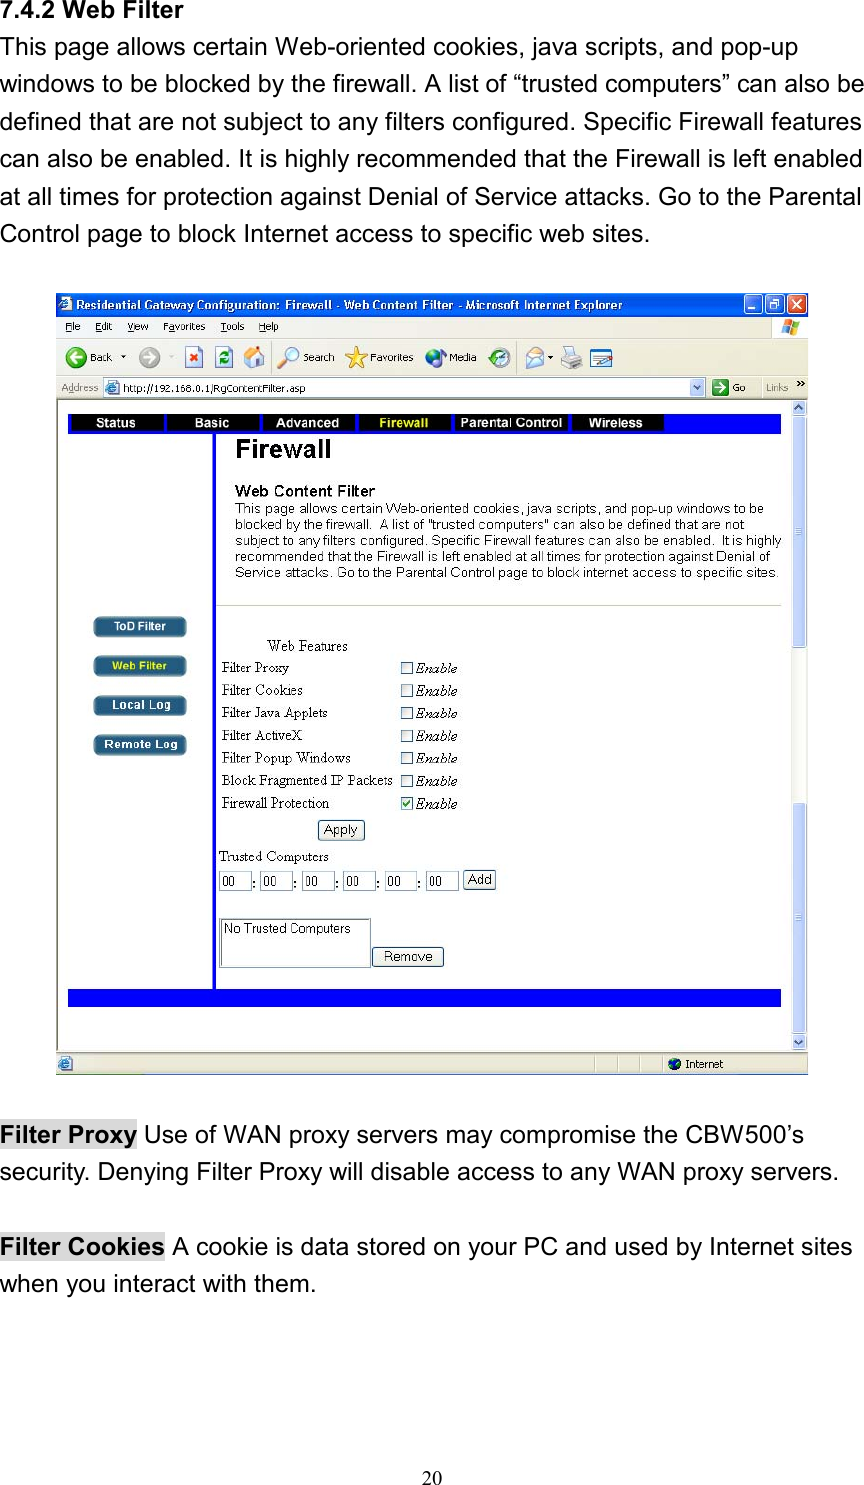 7.4.2 Web Filter This page allows certain Web-oriented cookies, java scripts, and pop-up windows to be blocked by the firewall. A list of “trusted computers” can also be defined that are not subject to any filters configured. Specific Firewall features can also be enabled. It is highly recommended that the Firewall is left enabled at all times for protection against Denial of Service attacks. Go to the Parental Control page to block Internet access to specific web sites.    Filter Proxy Use of WAN proxy servers may compromise the CBW500’s security. Denying Filter Proxy will disable access to any WAN proxy servers.  Filter Cookies A cookie is data stored on your PC and used by Internet sites when you interact with them.   20